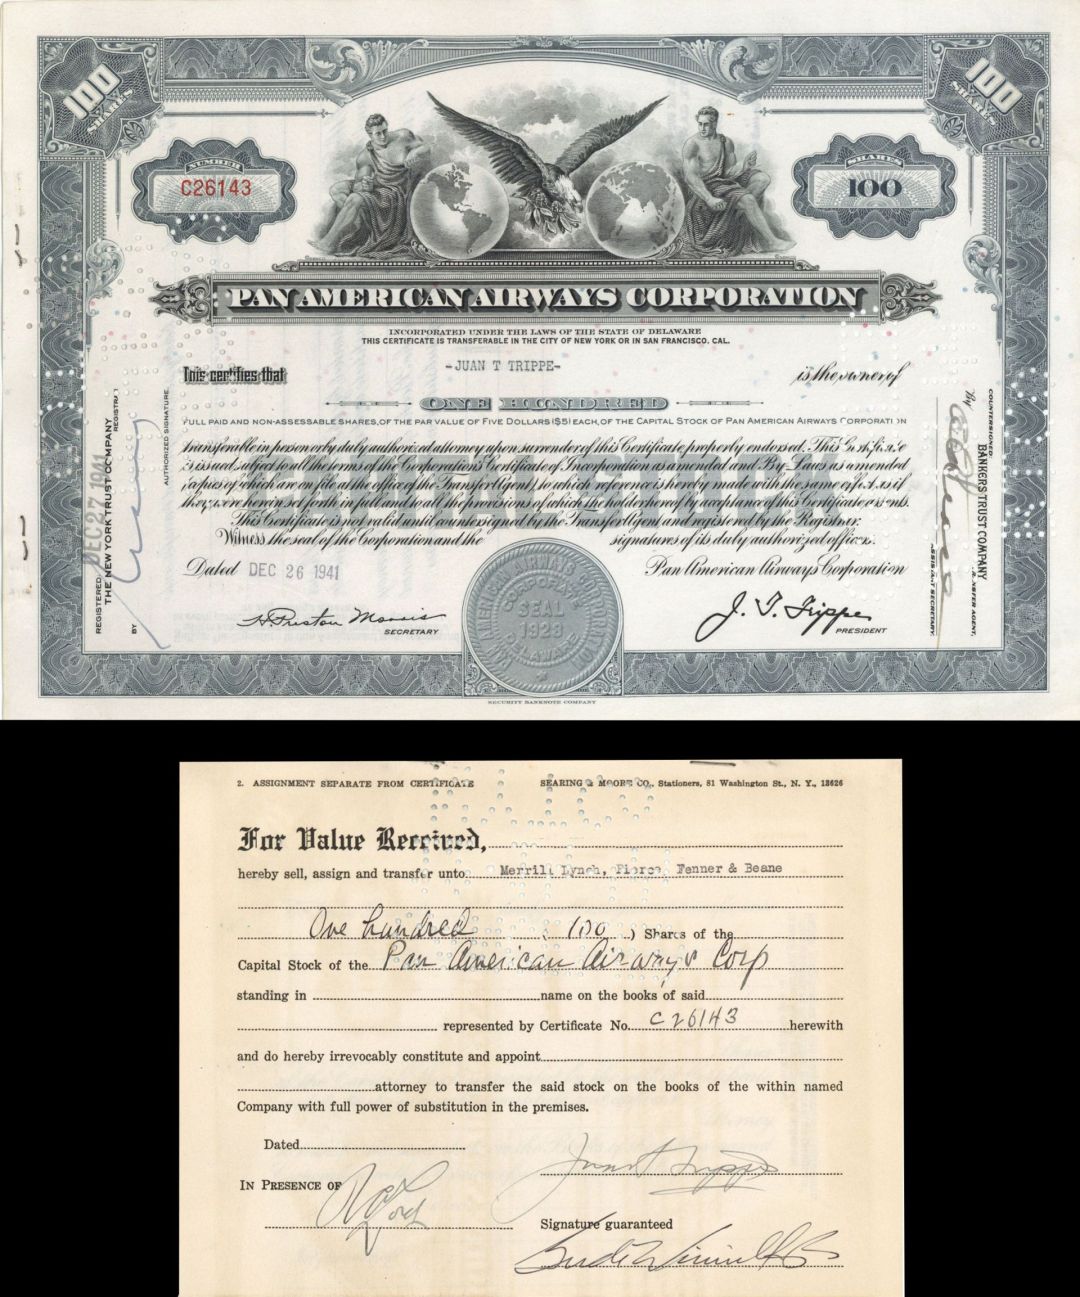 Pan American Airways Corp. issued to Juan T. Trippe and signed on back - 1941 dated Autographed Stock Certificate